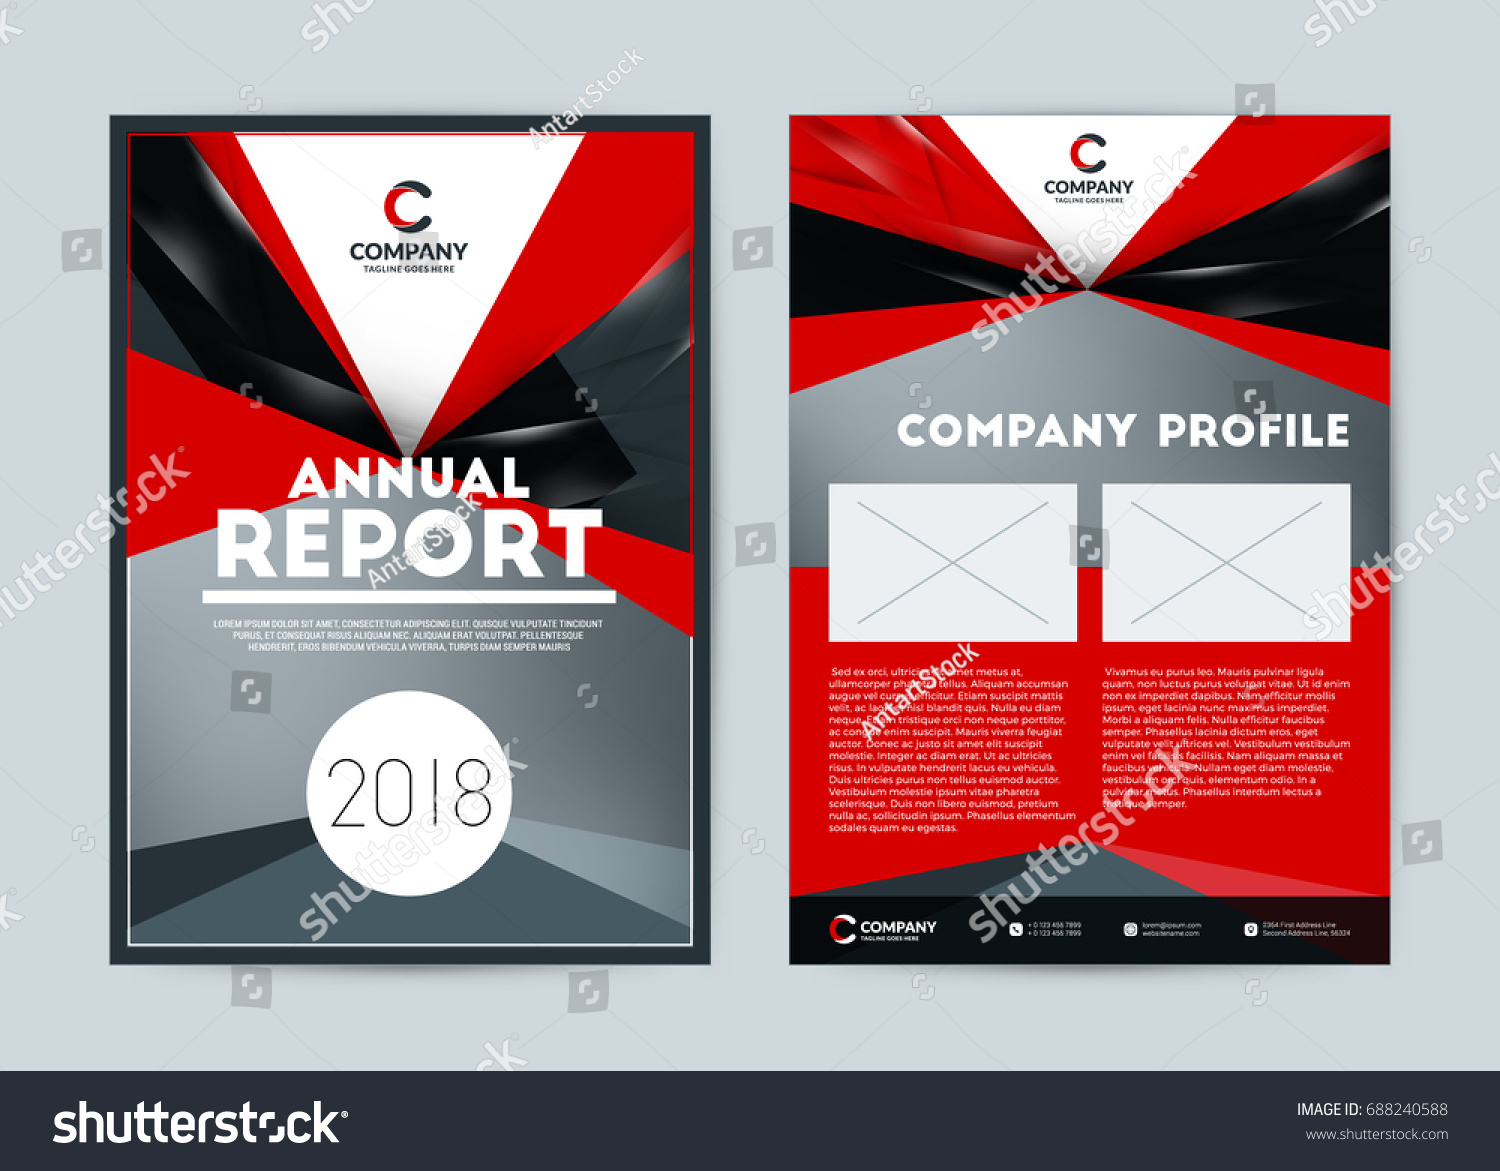 Download Annual Report Cover Design Template Vector Stock Vector Royalty Free 688240588